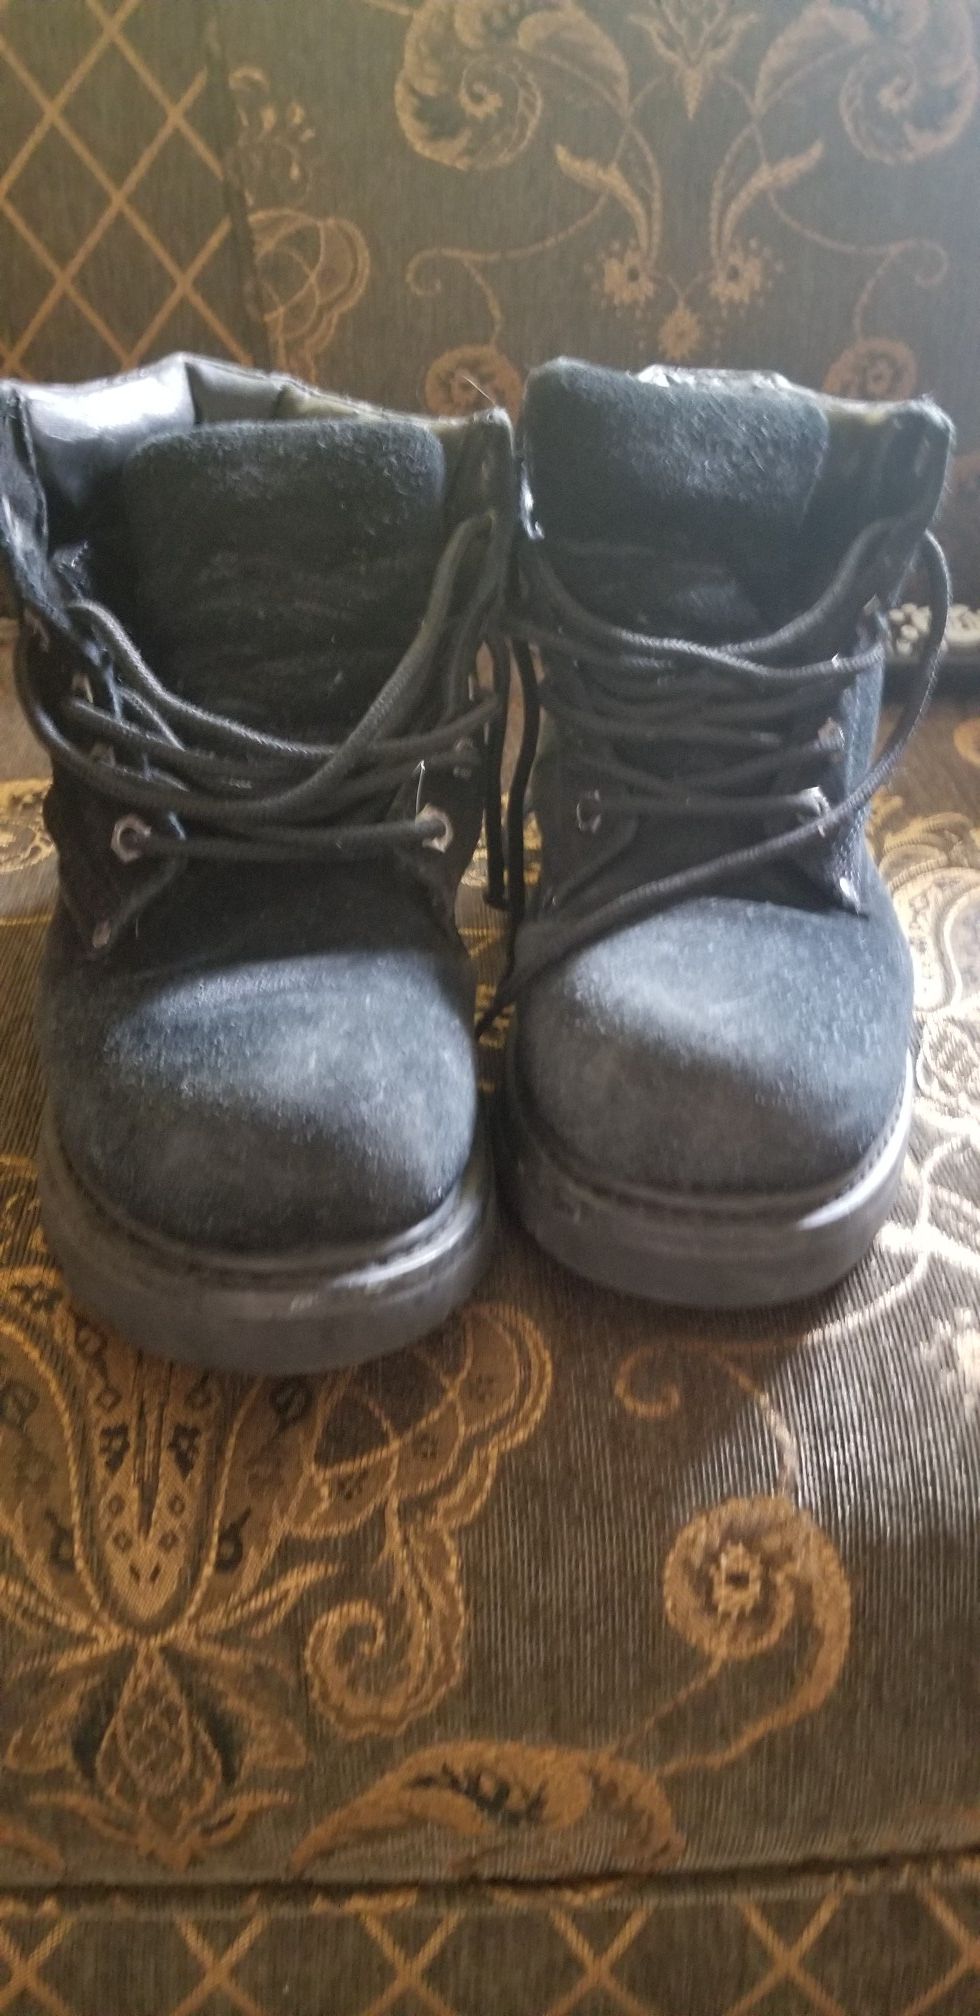 Work boots for men size 8